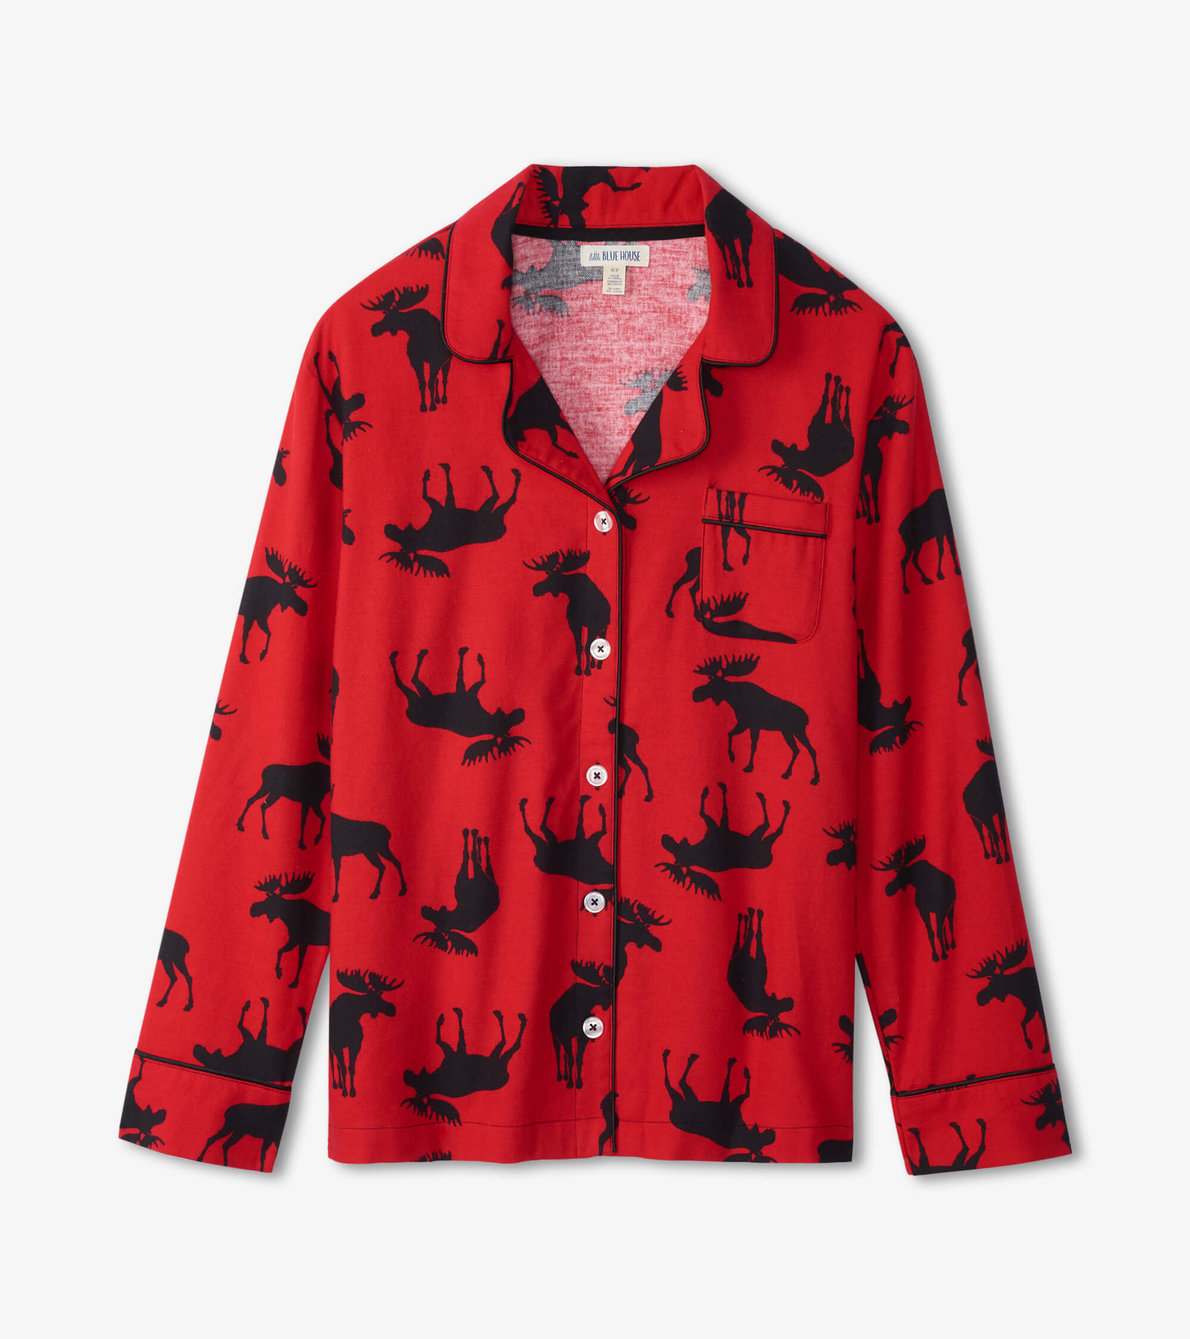 View larger image of Moose On Red Women's Flannel Pajama Set